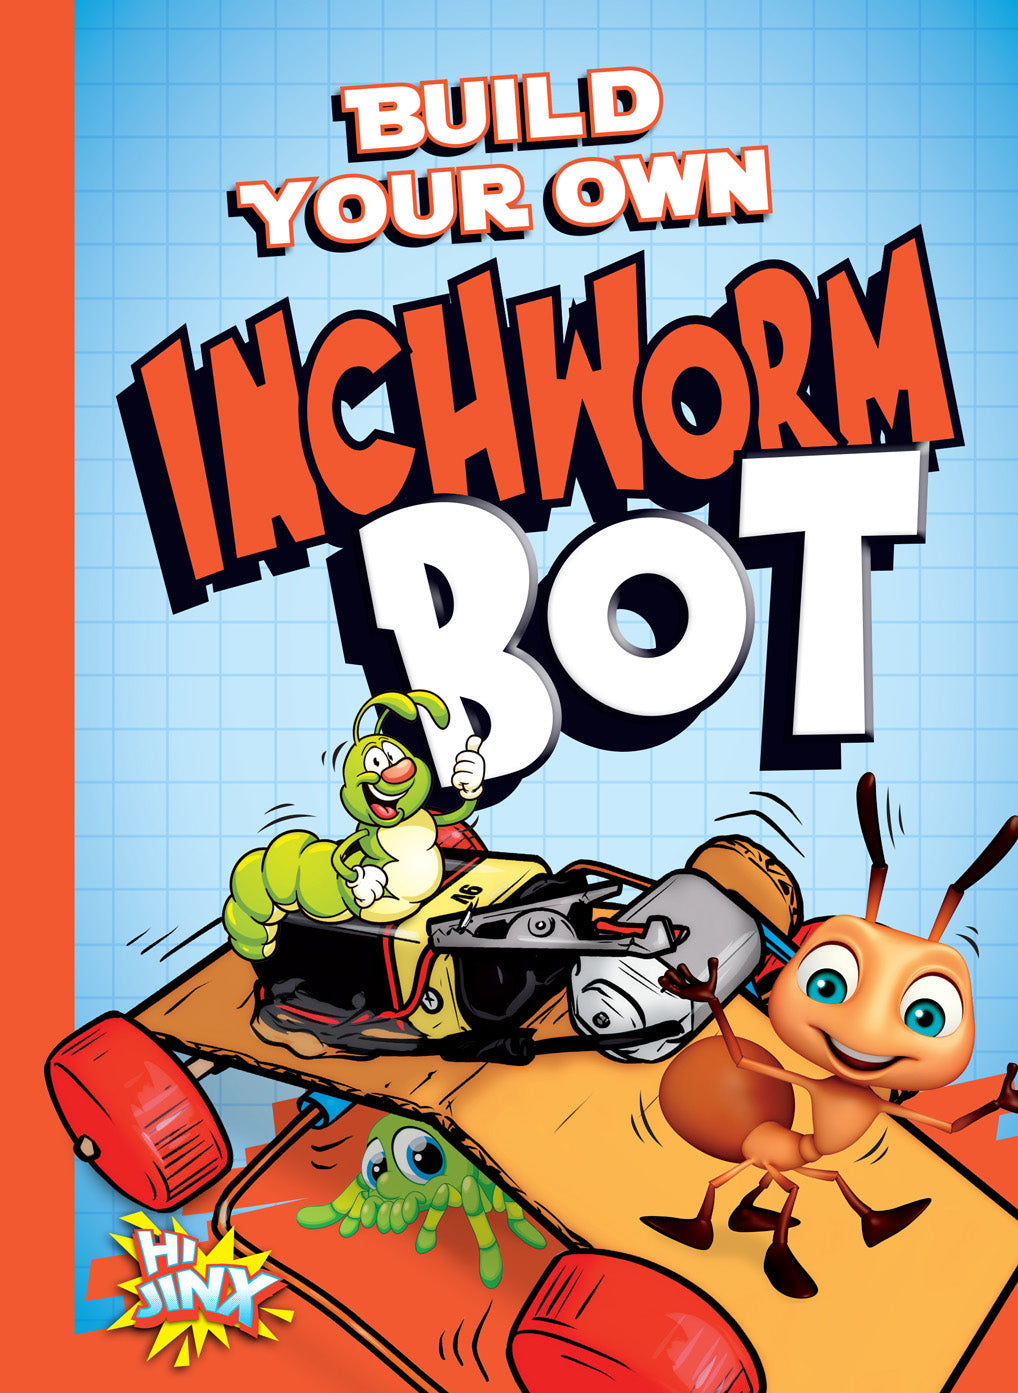 Bot Maker: Build Your Own Inchworm Bot